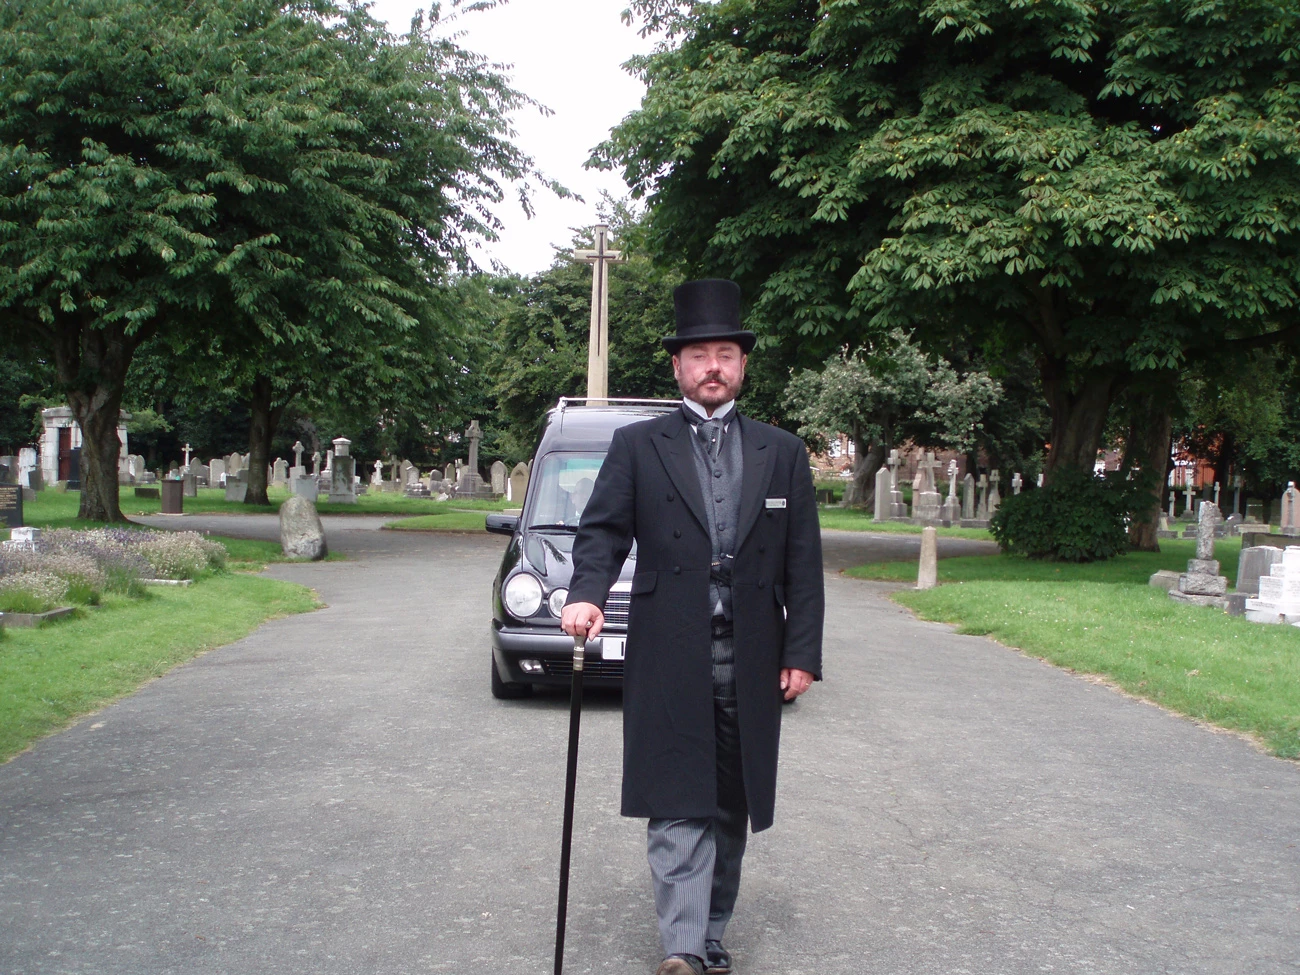 A funeral director walking in-front of a hearse